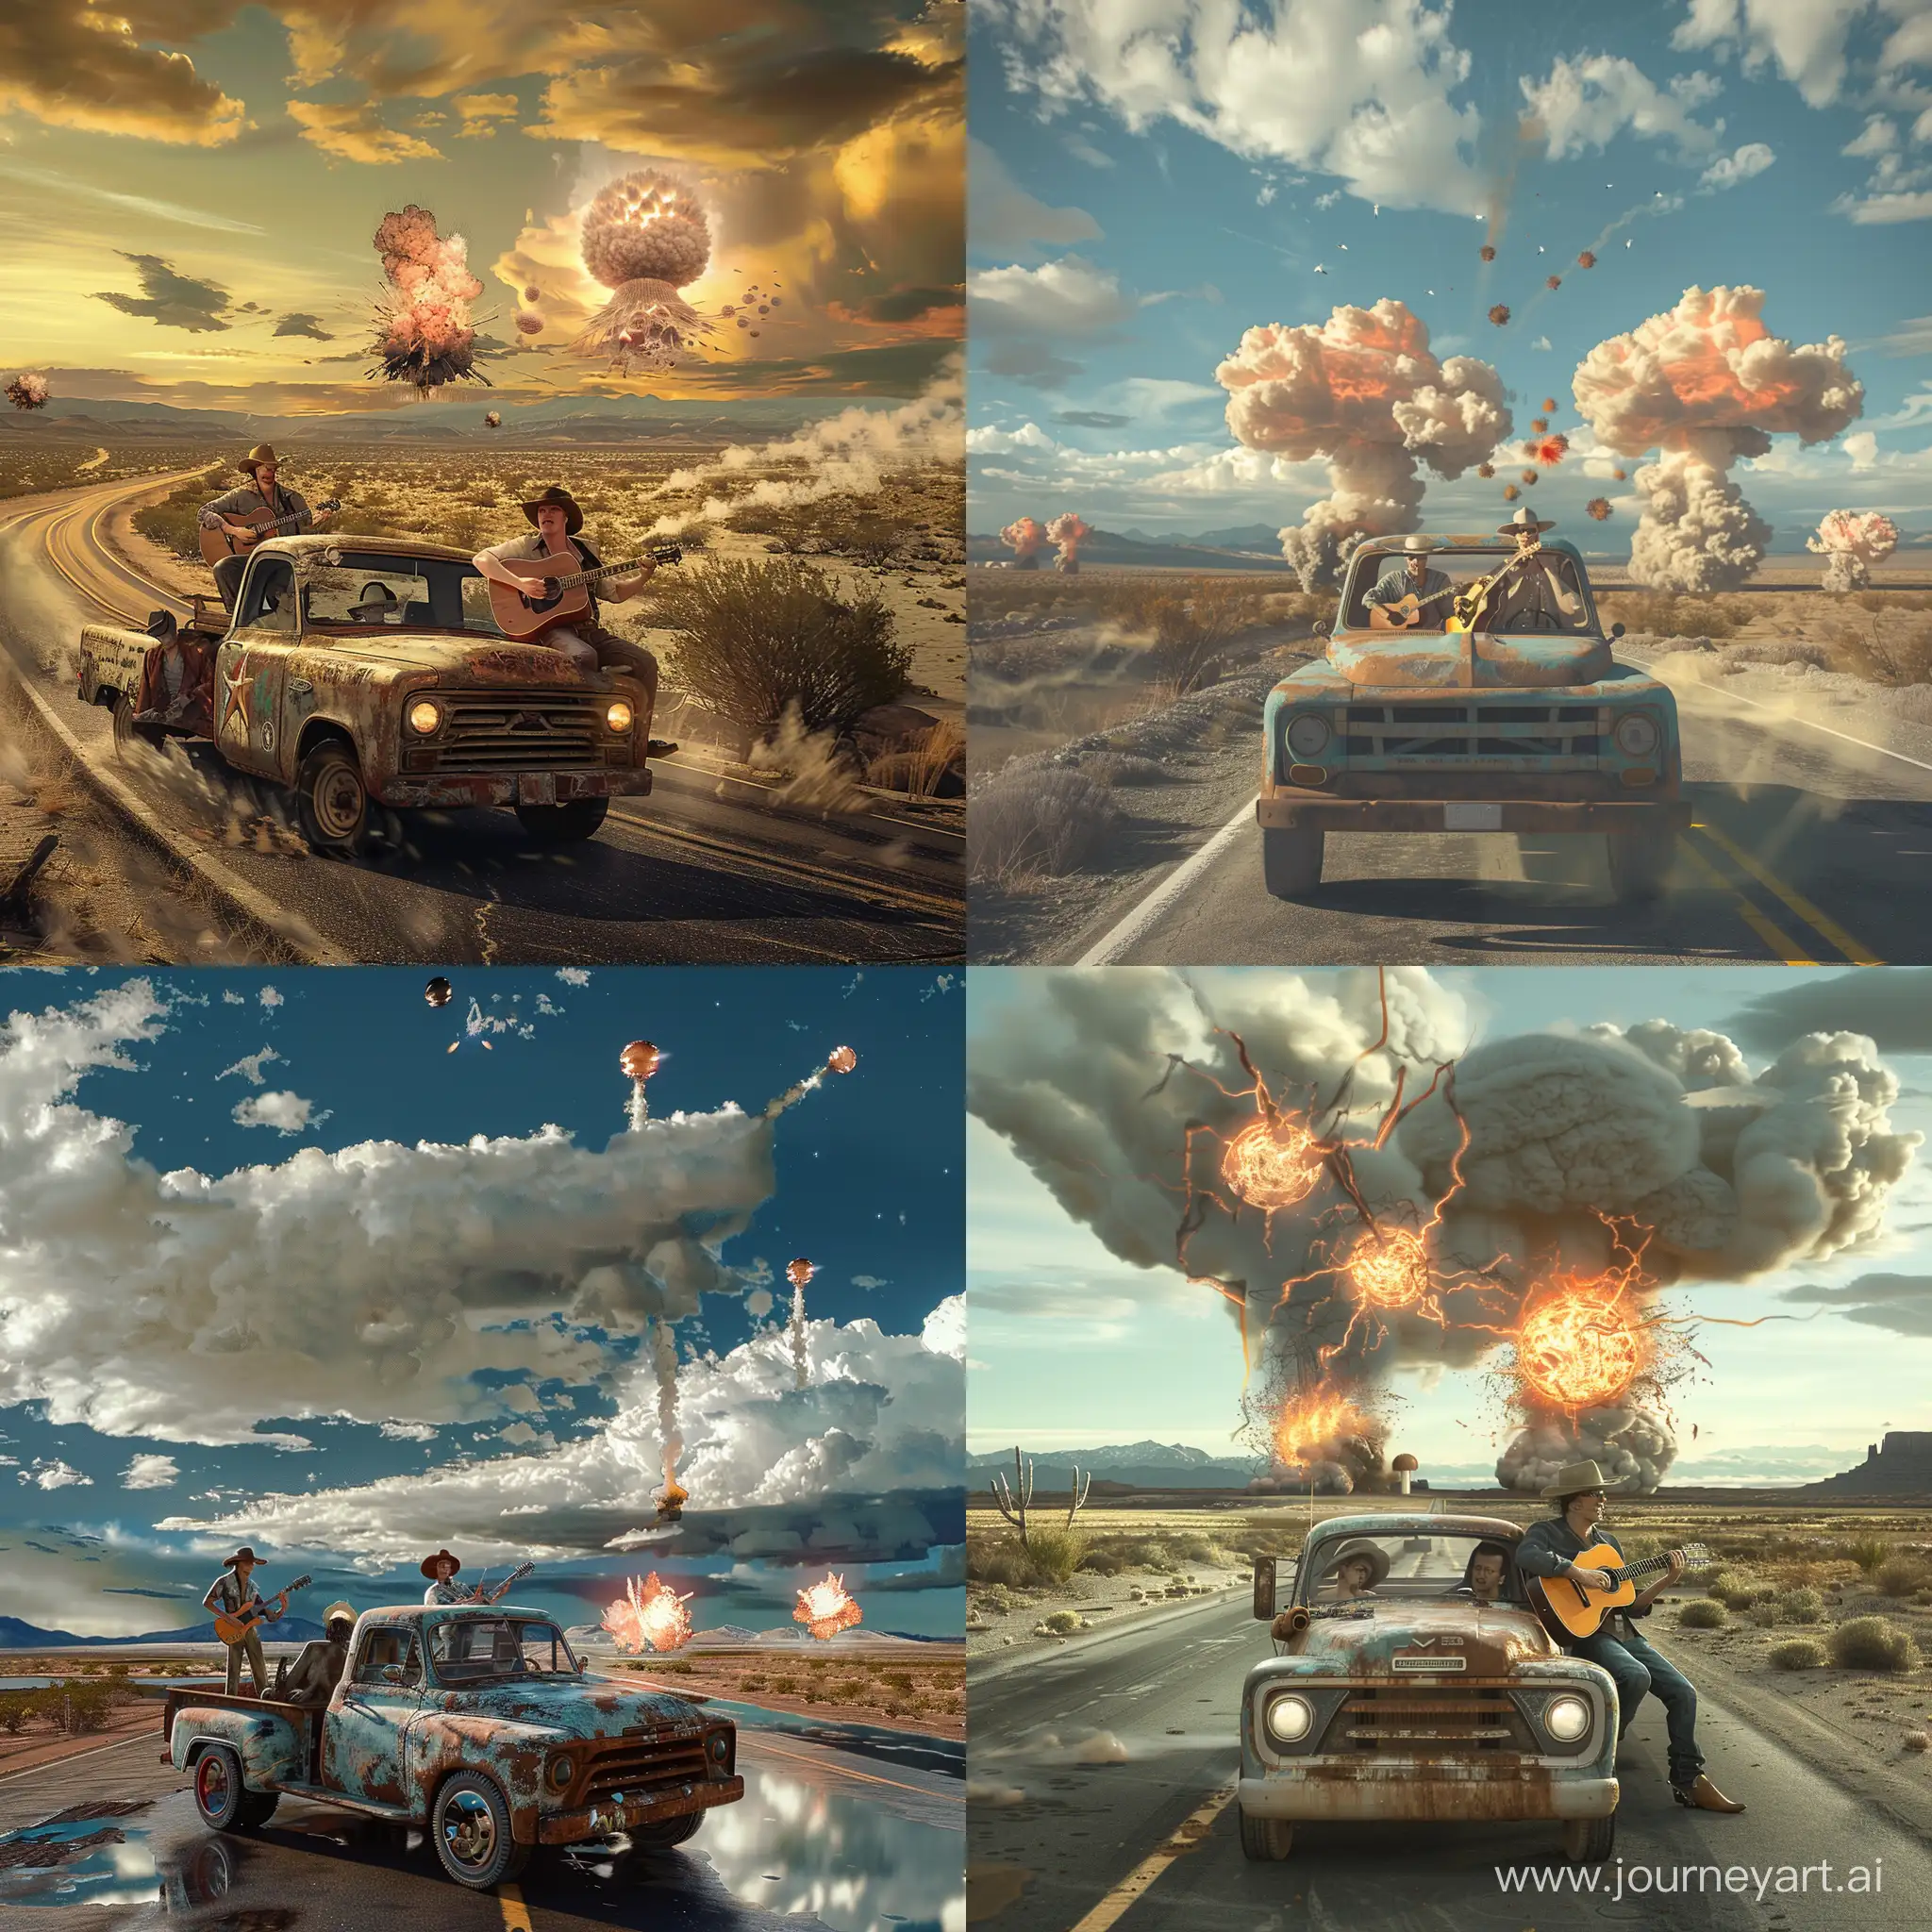 Desolate-Desert-Highway-Cowboys-Playing-Guitar-Amidst-Nuclear-Explosions